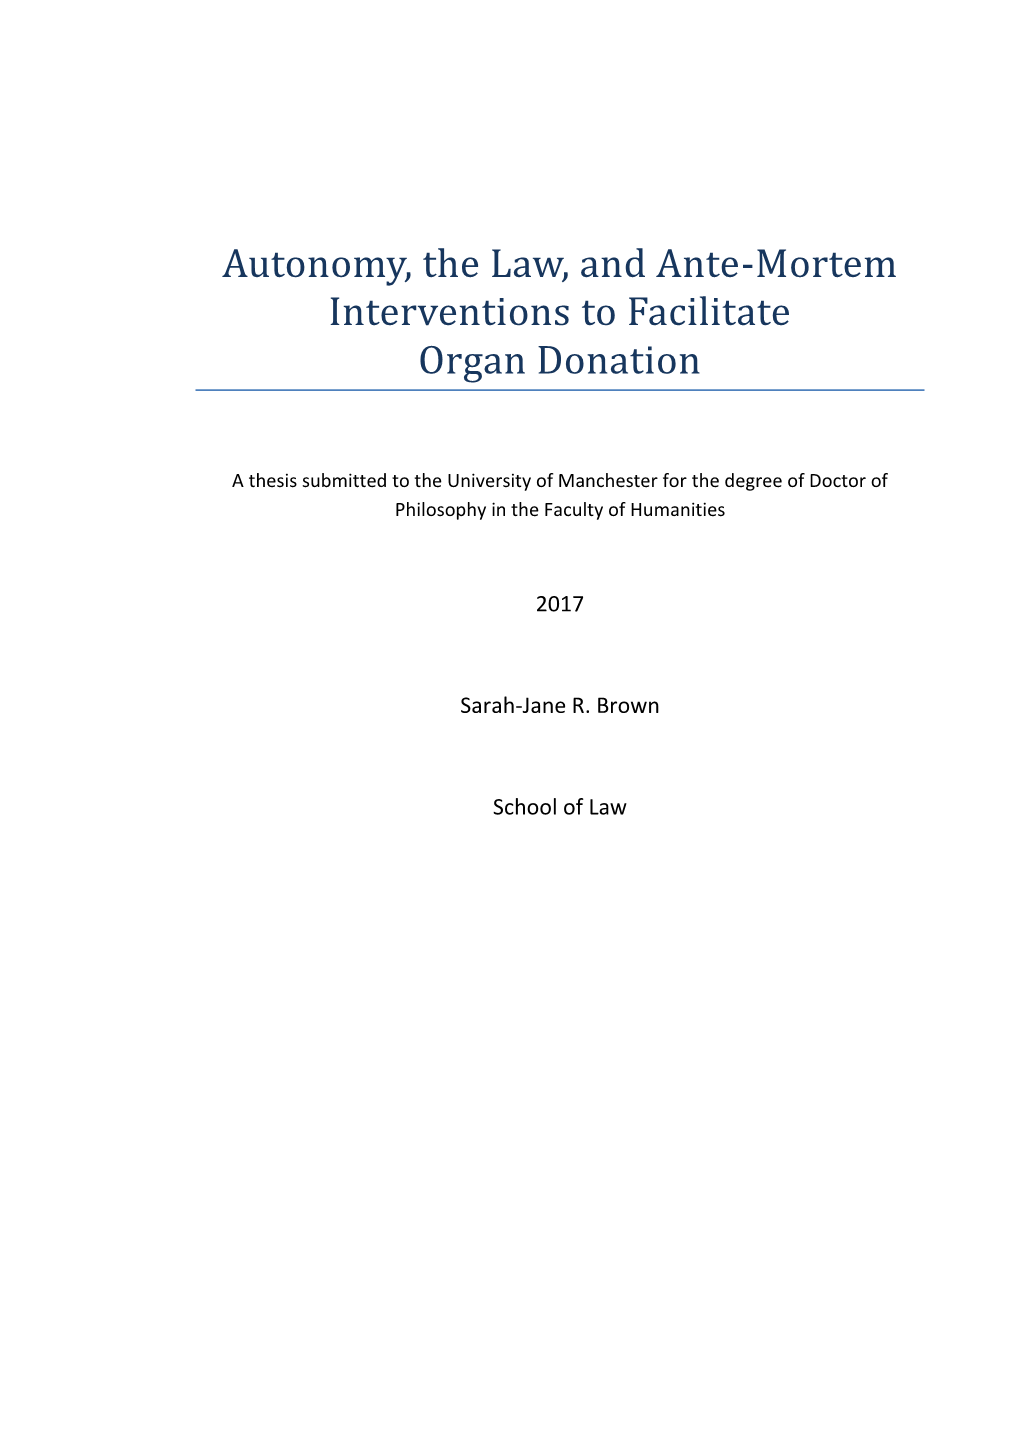 Autonomy, the Law, and Ante-Mortem Interventions to Facilitate Organ Donation